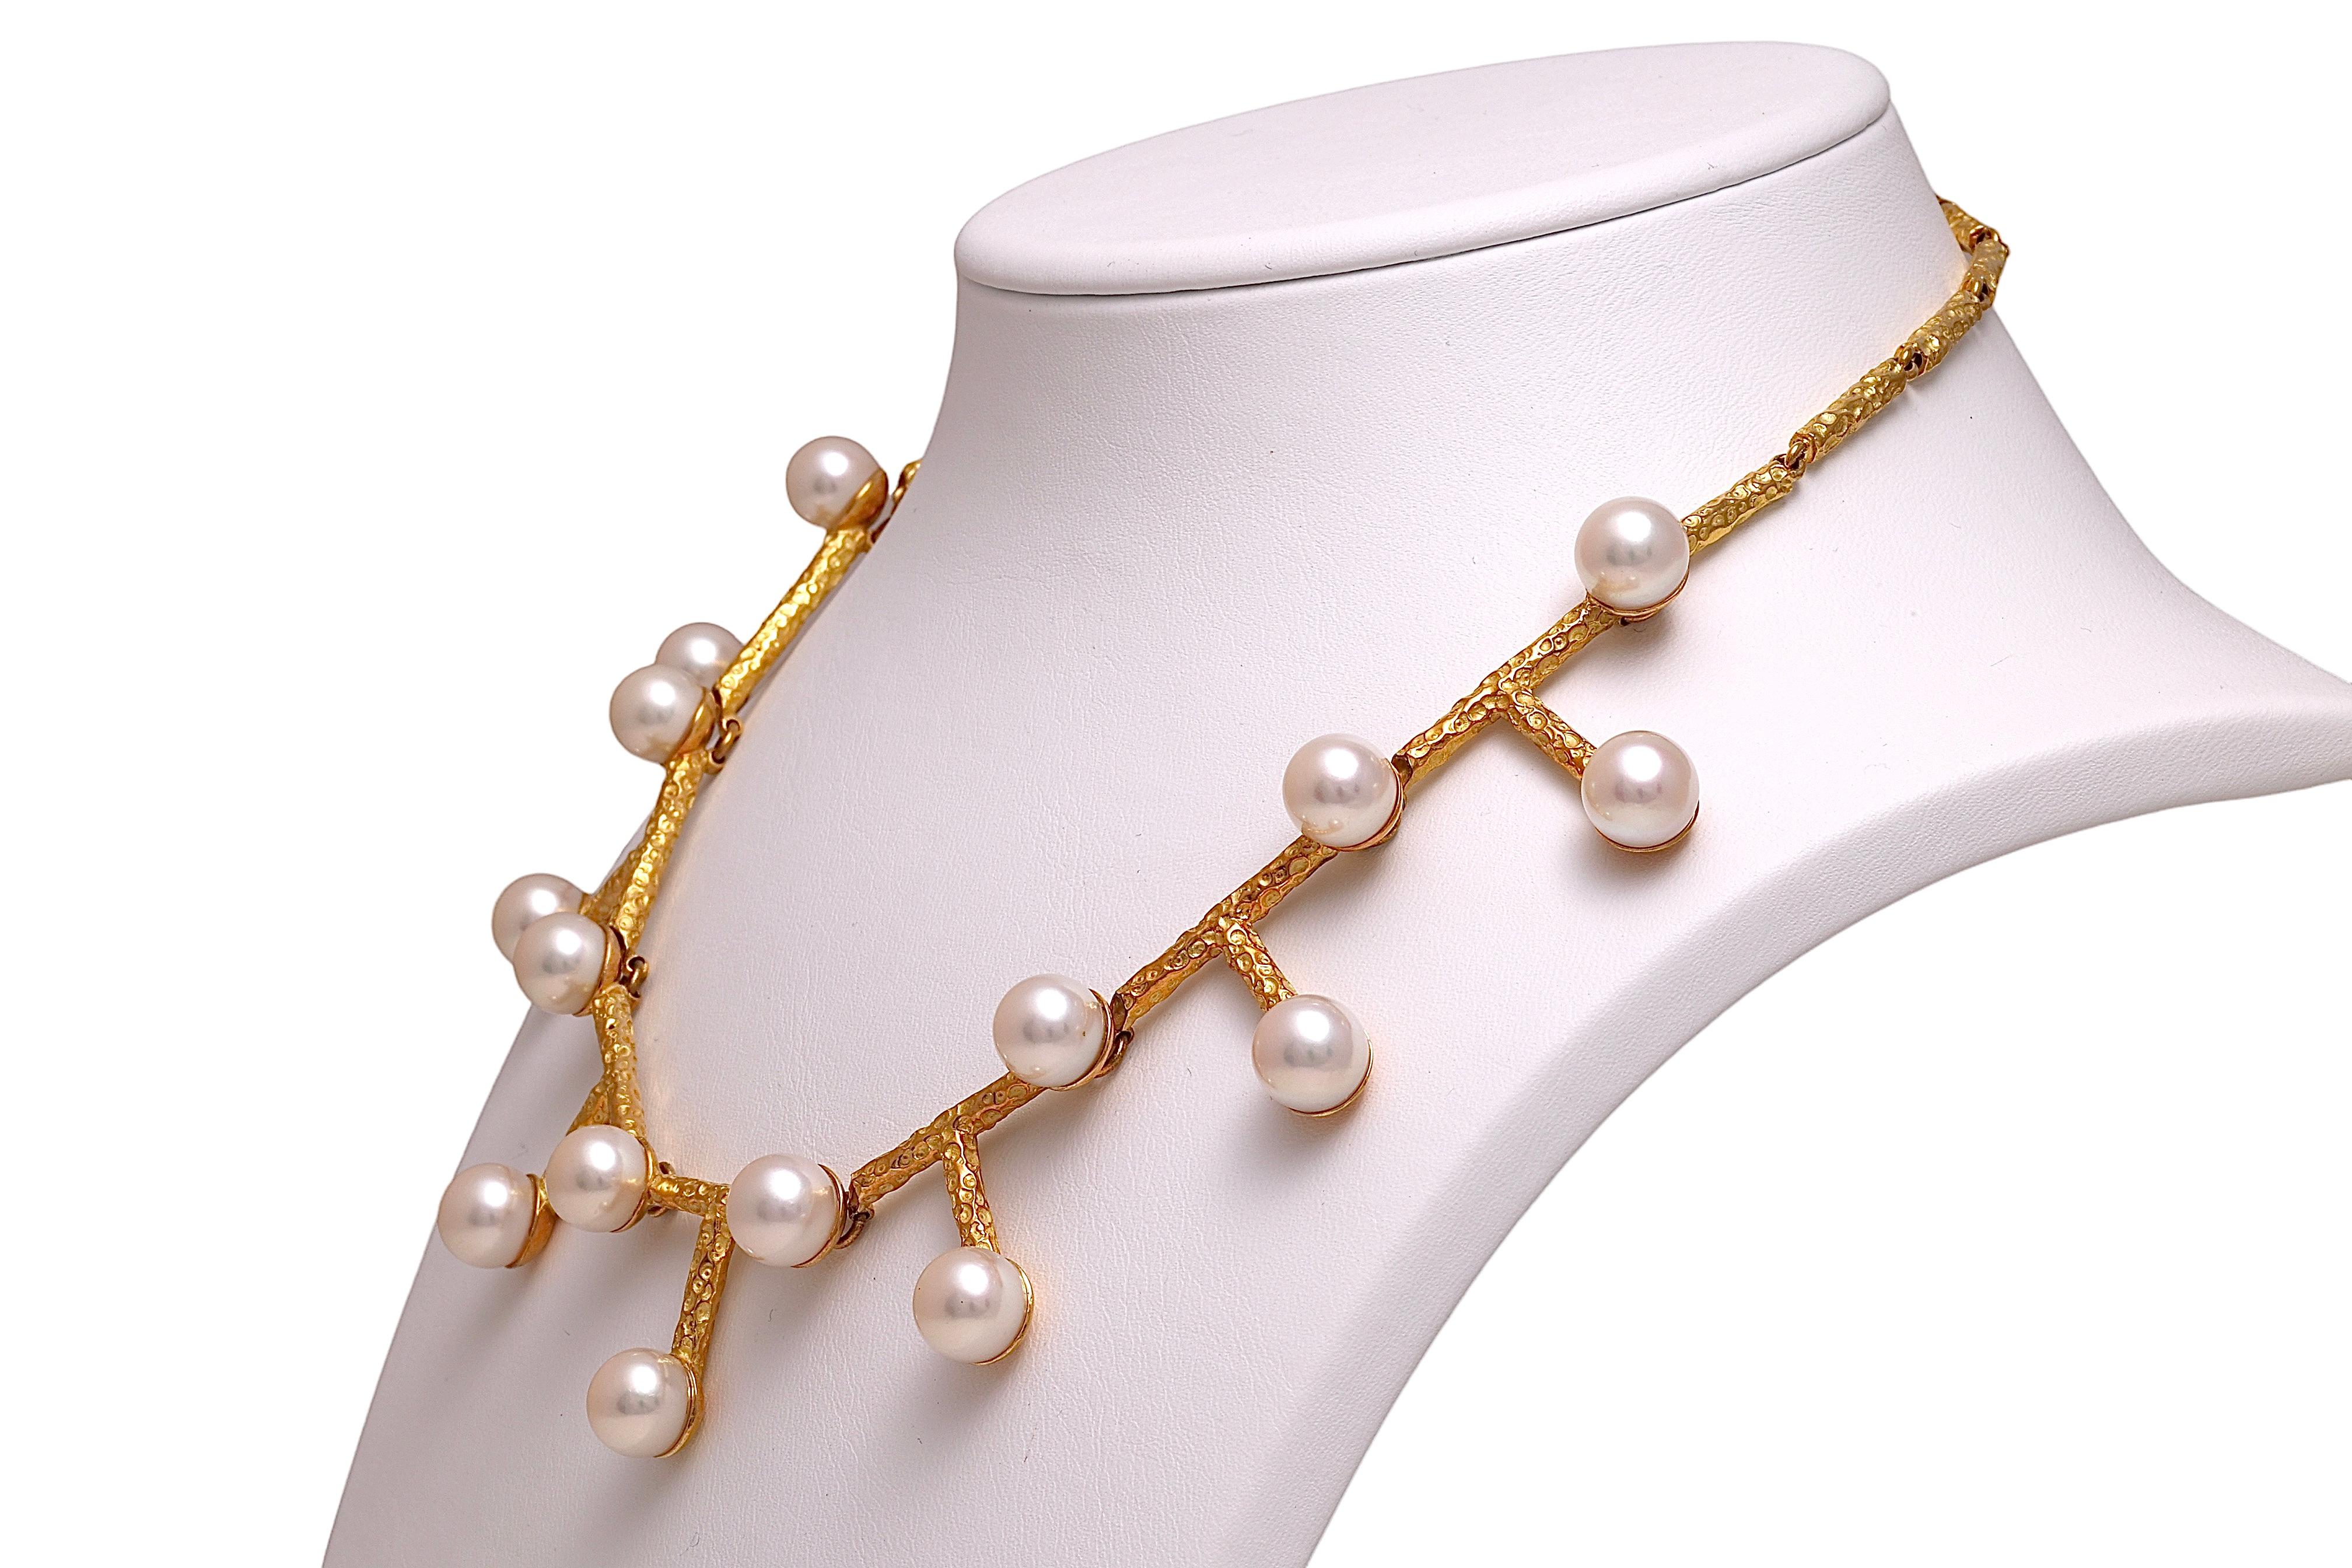 Very Original 18kt Yellow Gold Necklace by J.P. De Saedeleer with Pearls For Sale 6